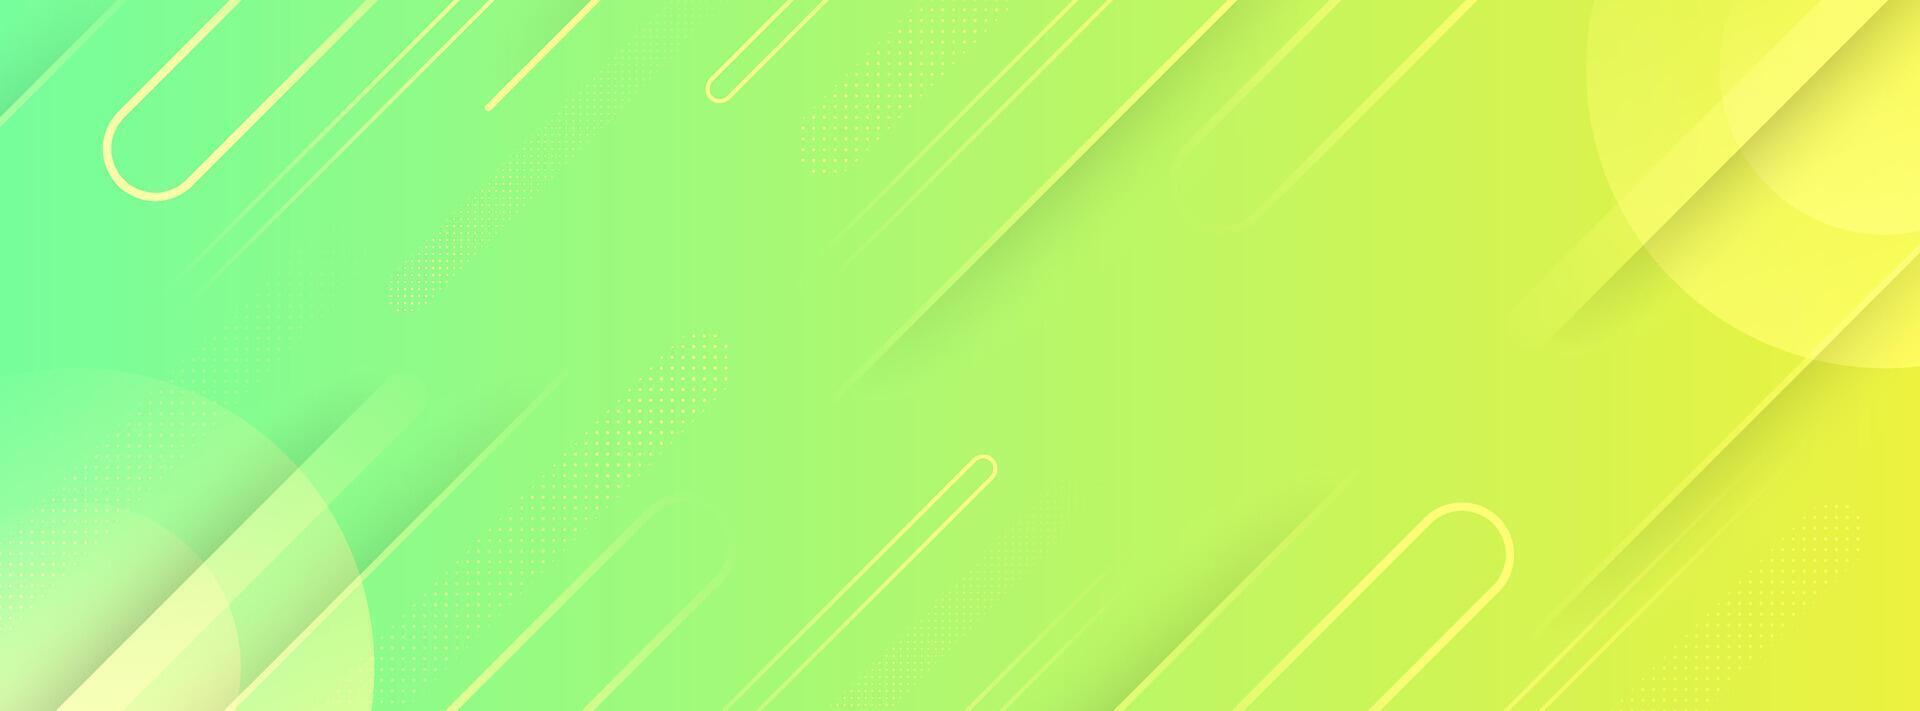 Banner background template, green and yellow, slash effect style, geometric, line, memphis, circle vector